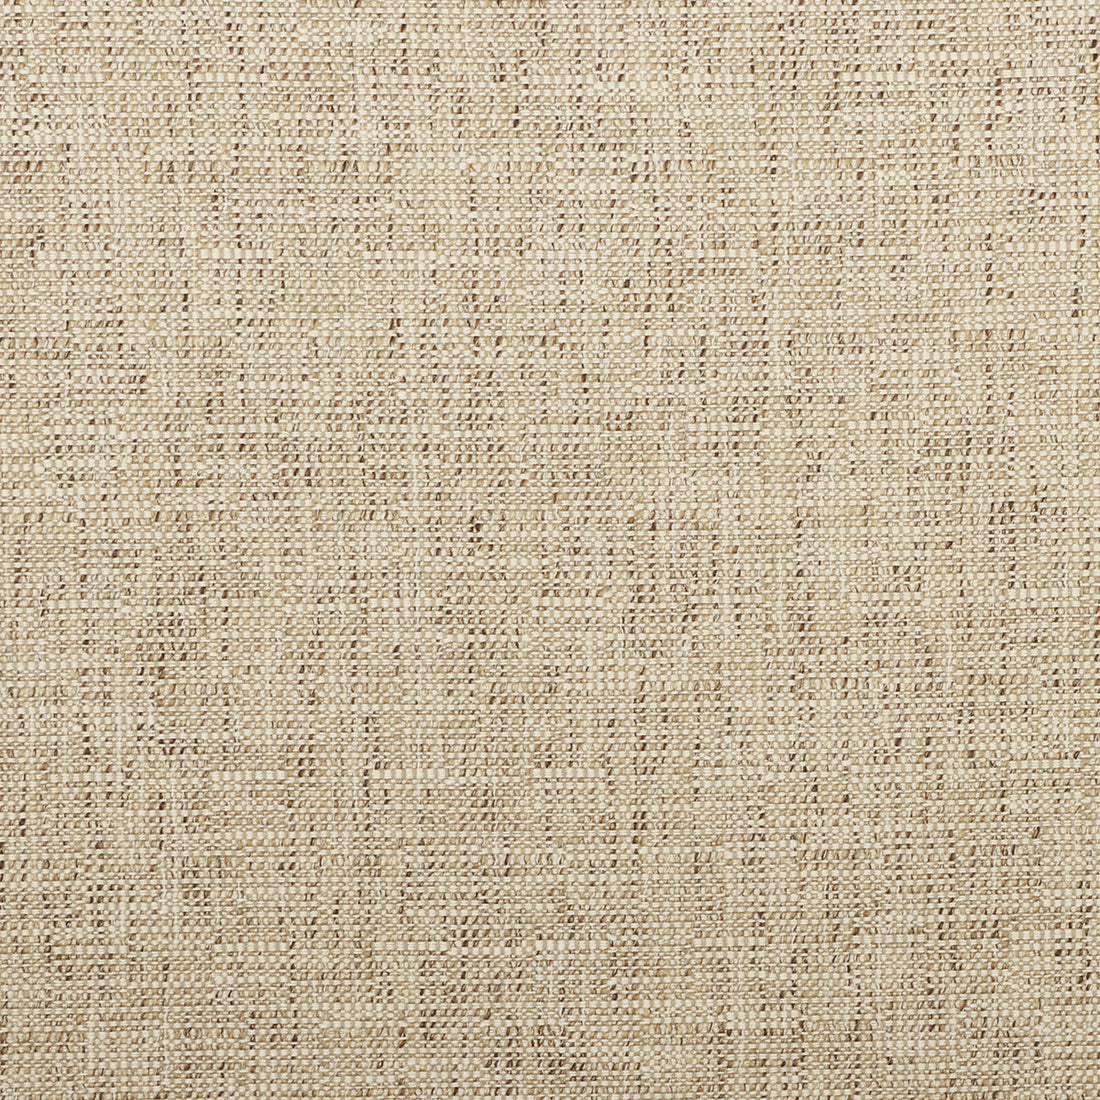 Kravet Smart fabric in 35518-16 color - pattern 35518.16.0 - by Kravet Smart in the Inside Out Performance Fabrics collection